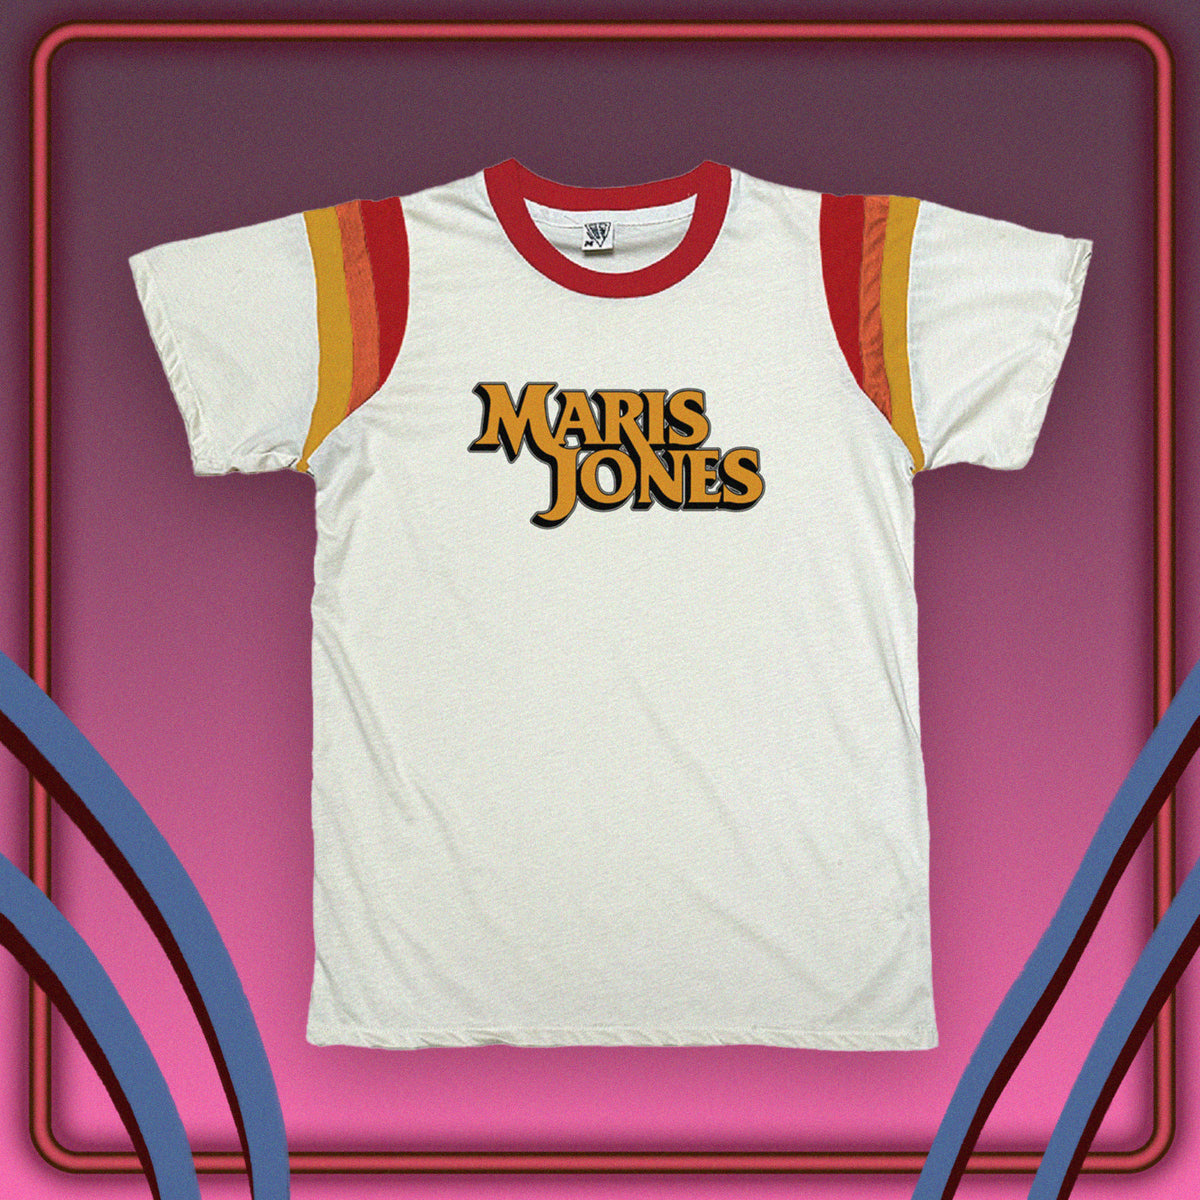 A white tshirt with red, orange and yellow shoulder stripes and a yellow maris jones logo